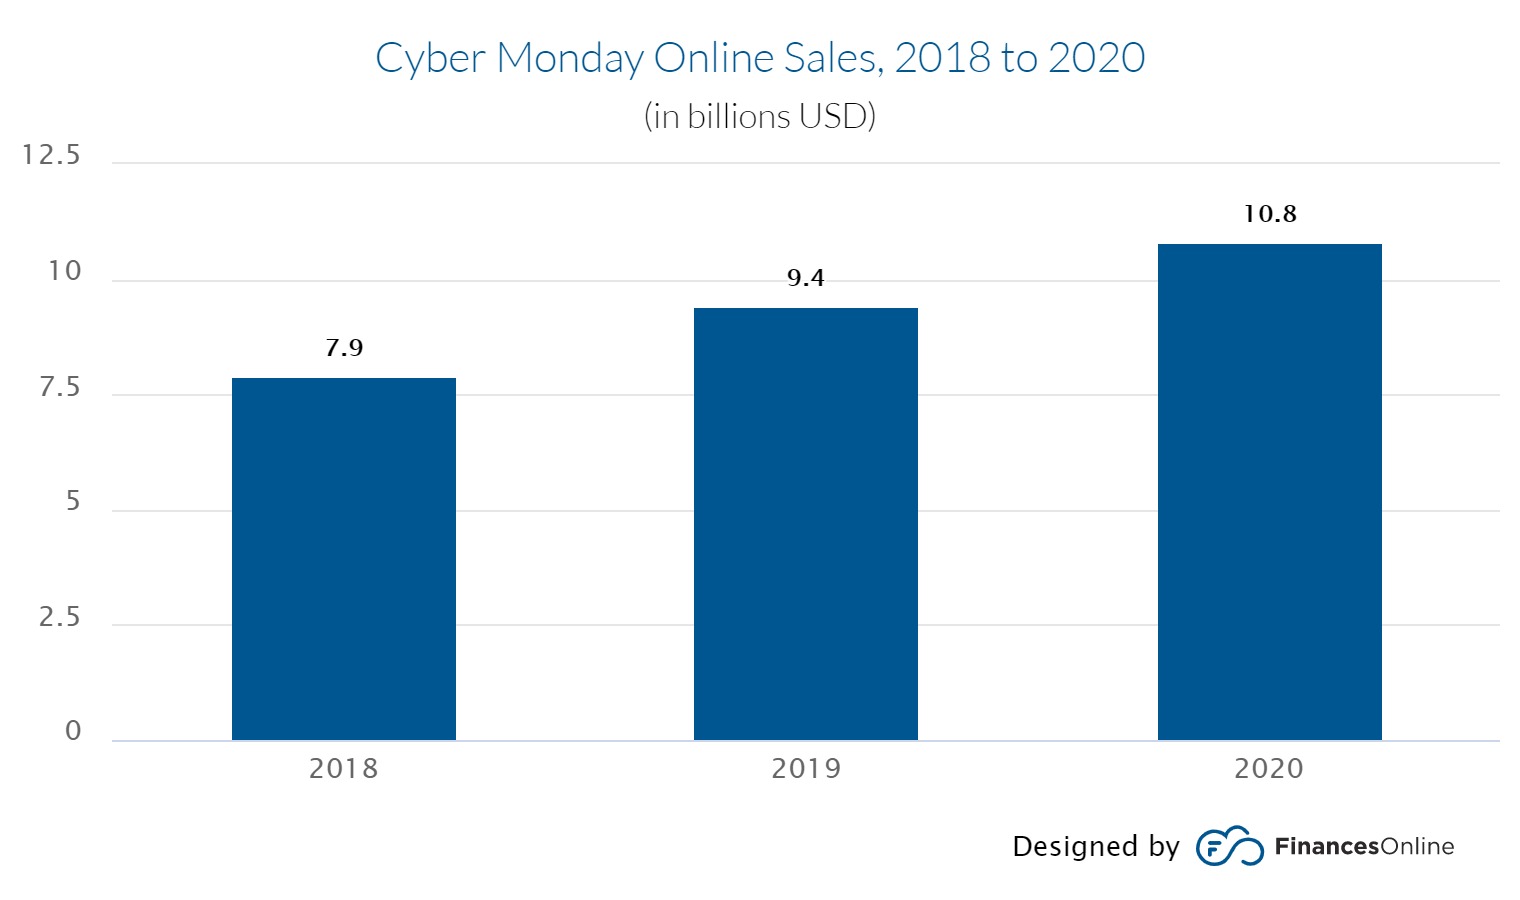 Cyber Monday Sales chart comparing 2018, 2019 and 2020.